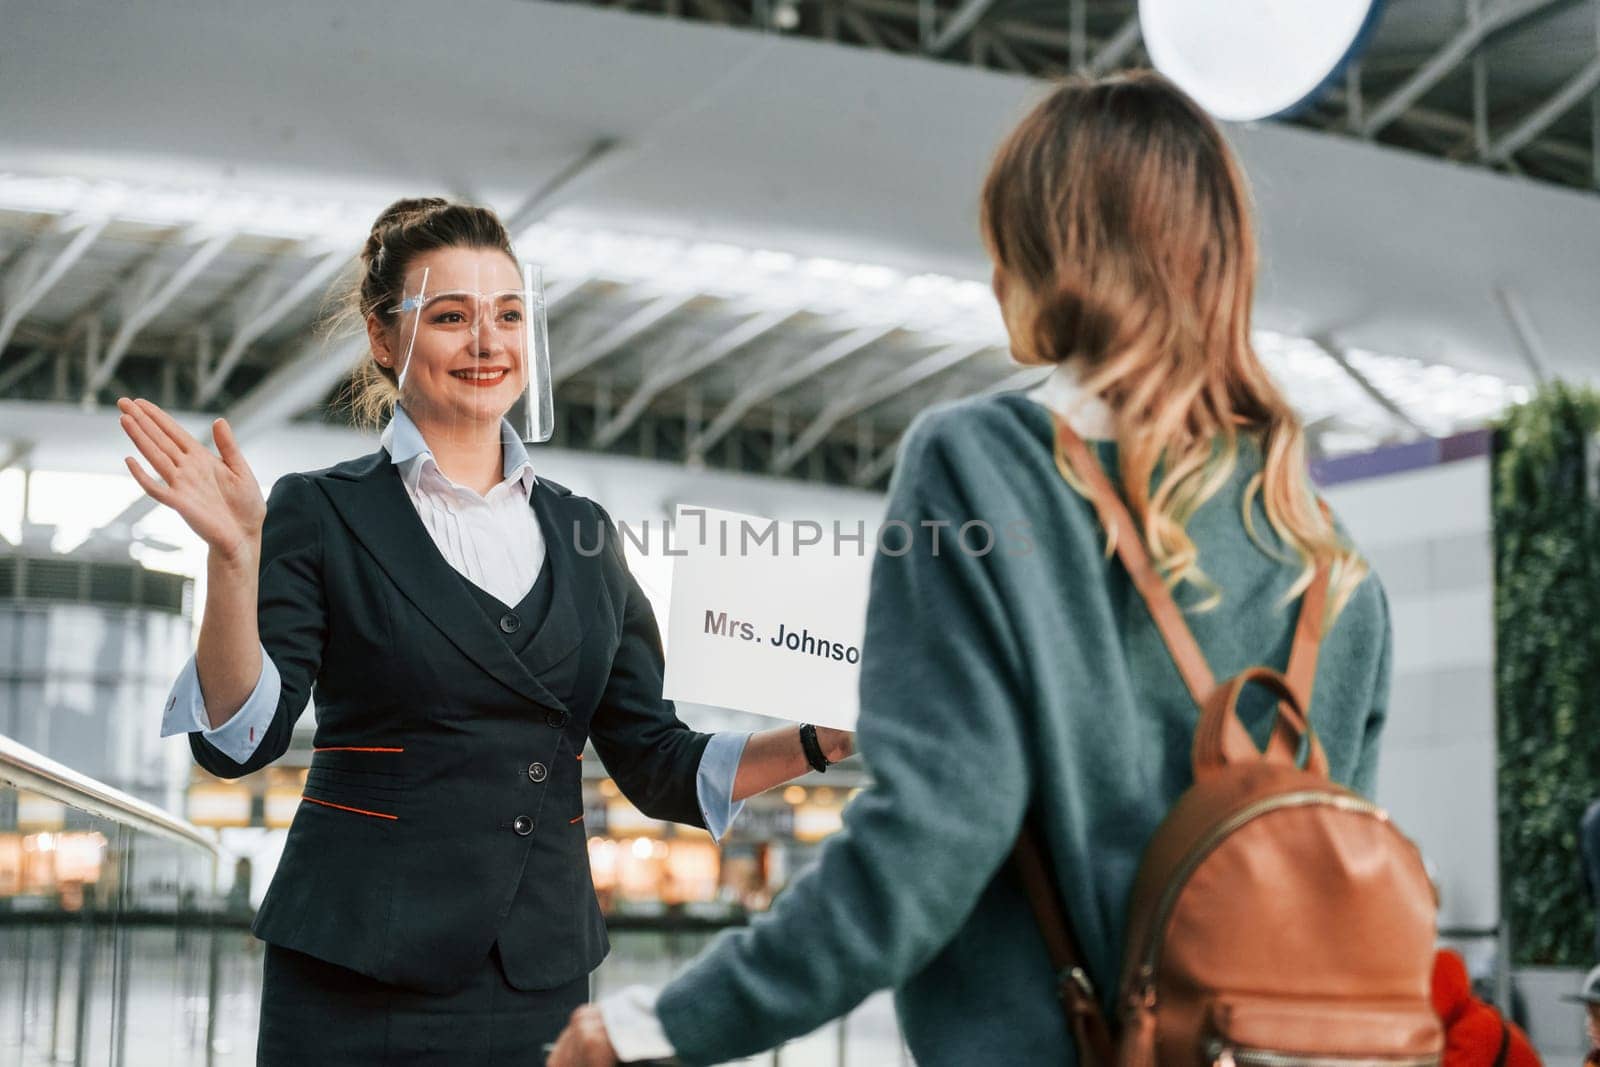 Woman with plate with text. Young female tourist is in the airport at daytime.